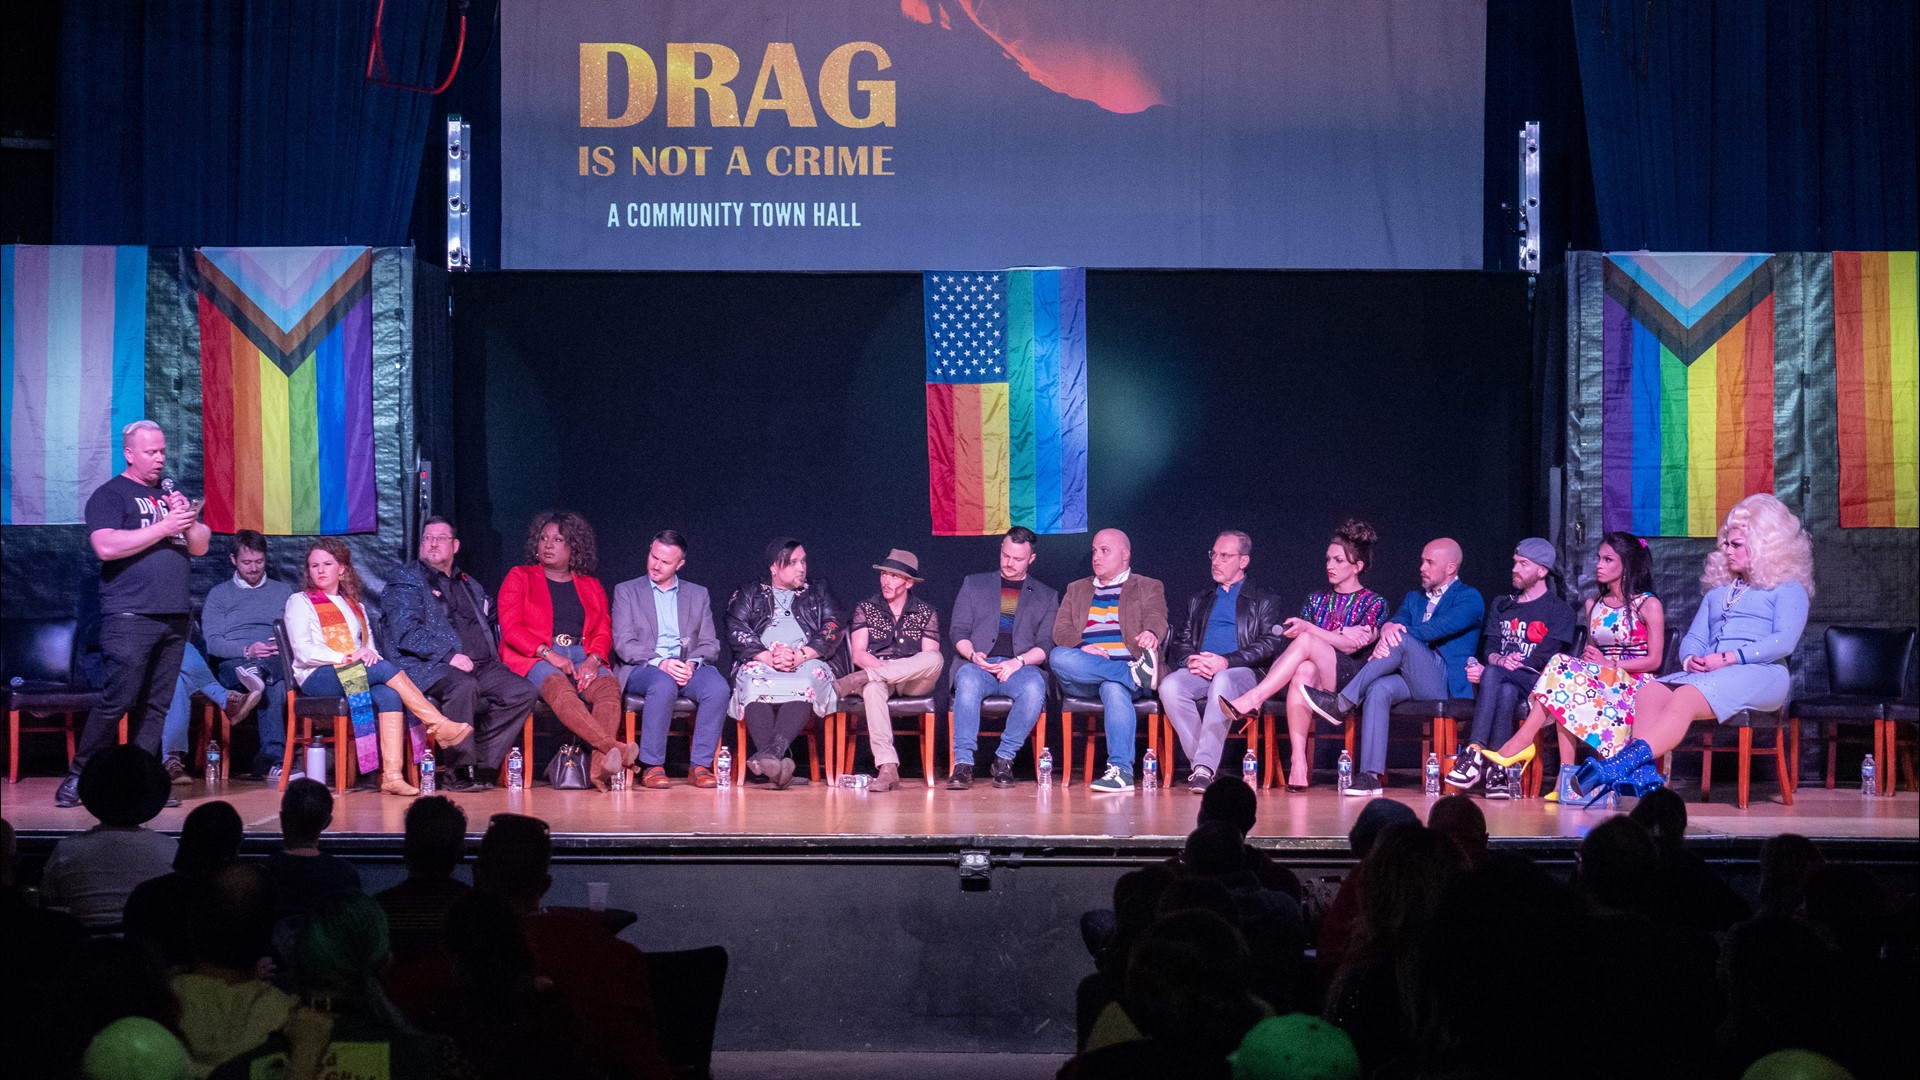 A proposed bill banning drag shows appears to be dead but the community is speaking out against others targeting the LGBTQ+ community.